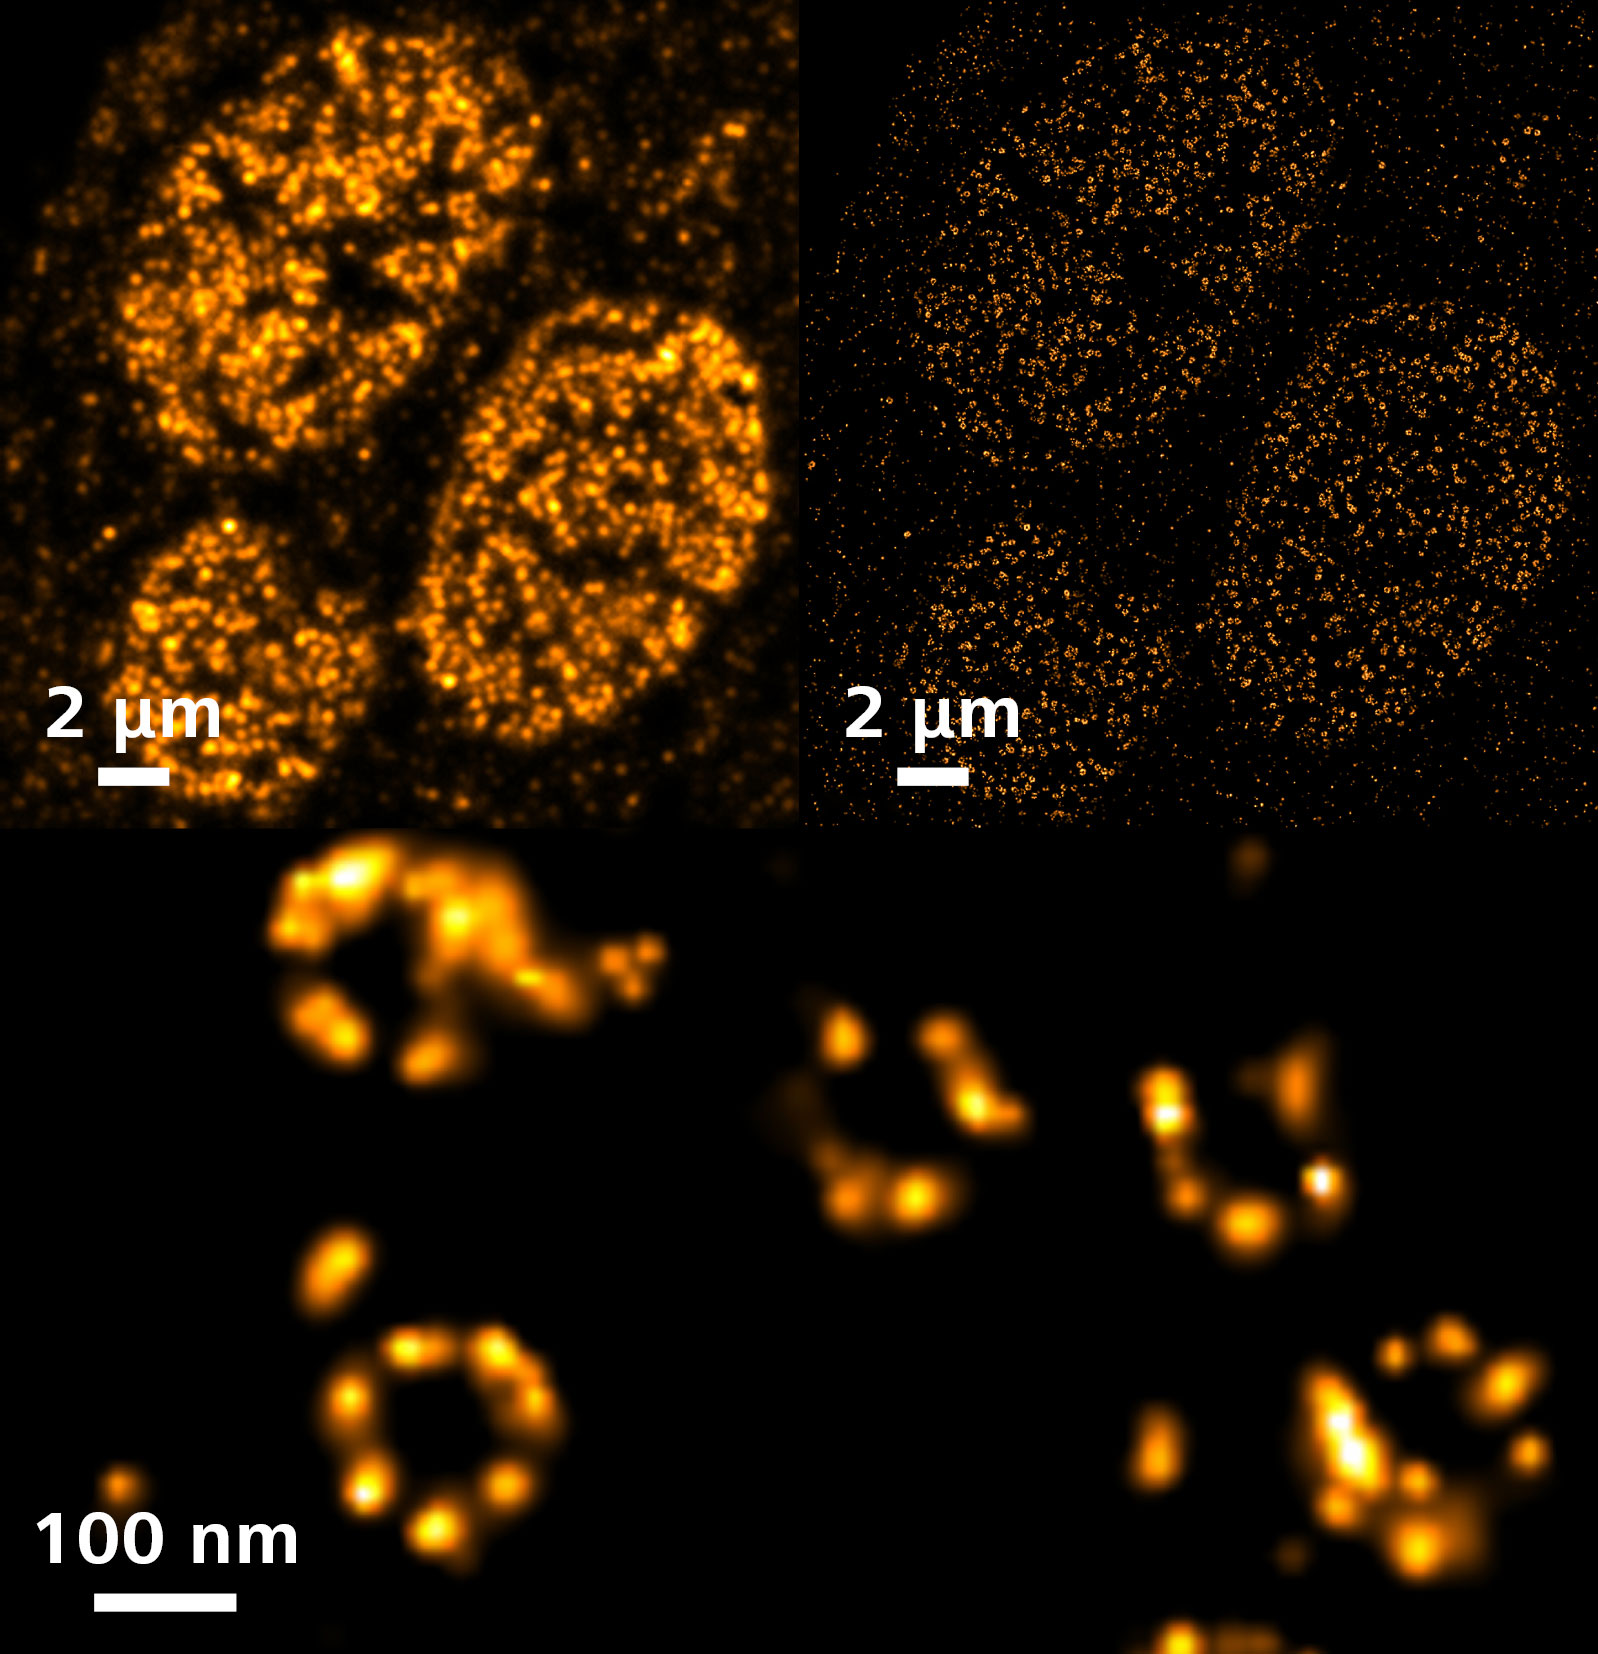 SMLM: Eightfold symmetry of the nuclear pore complex in A6 cell. 